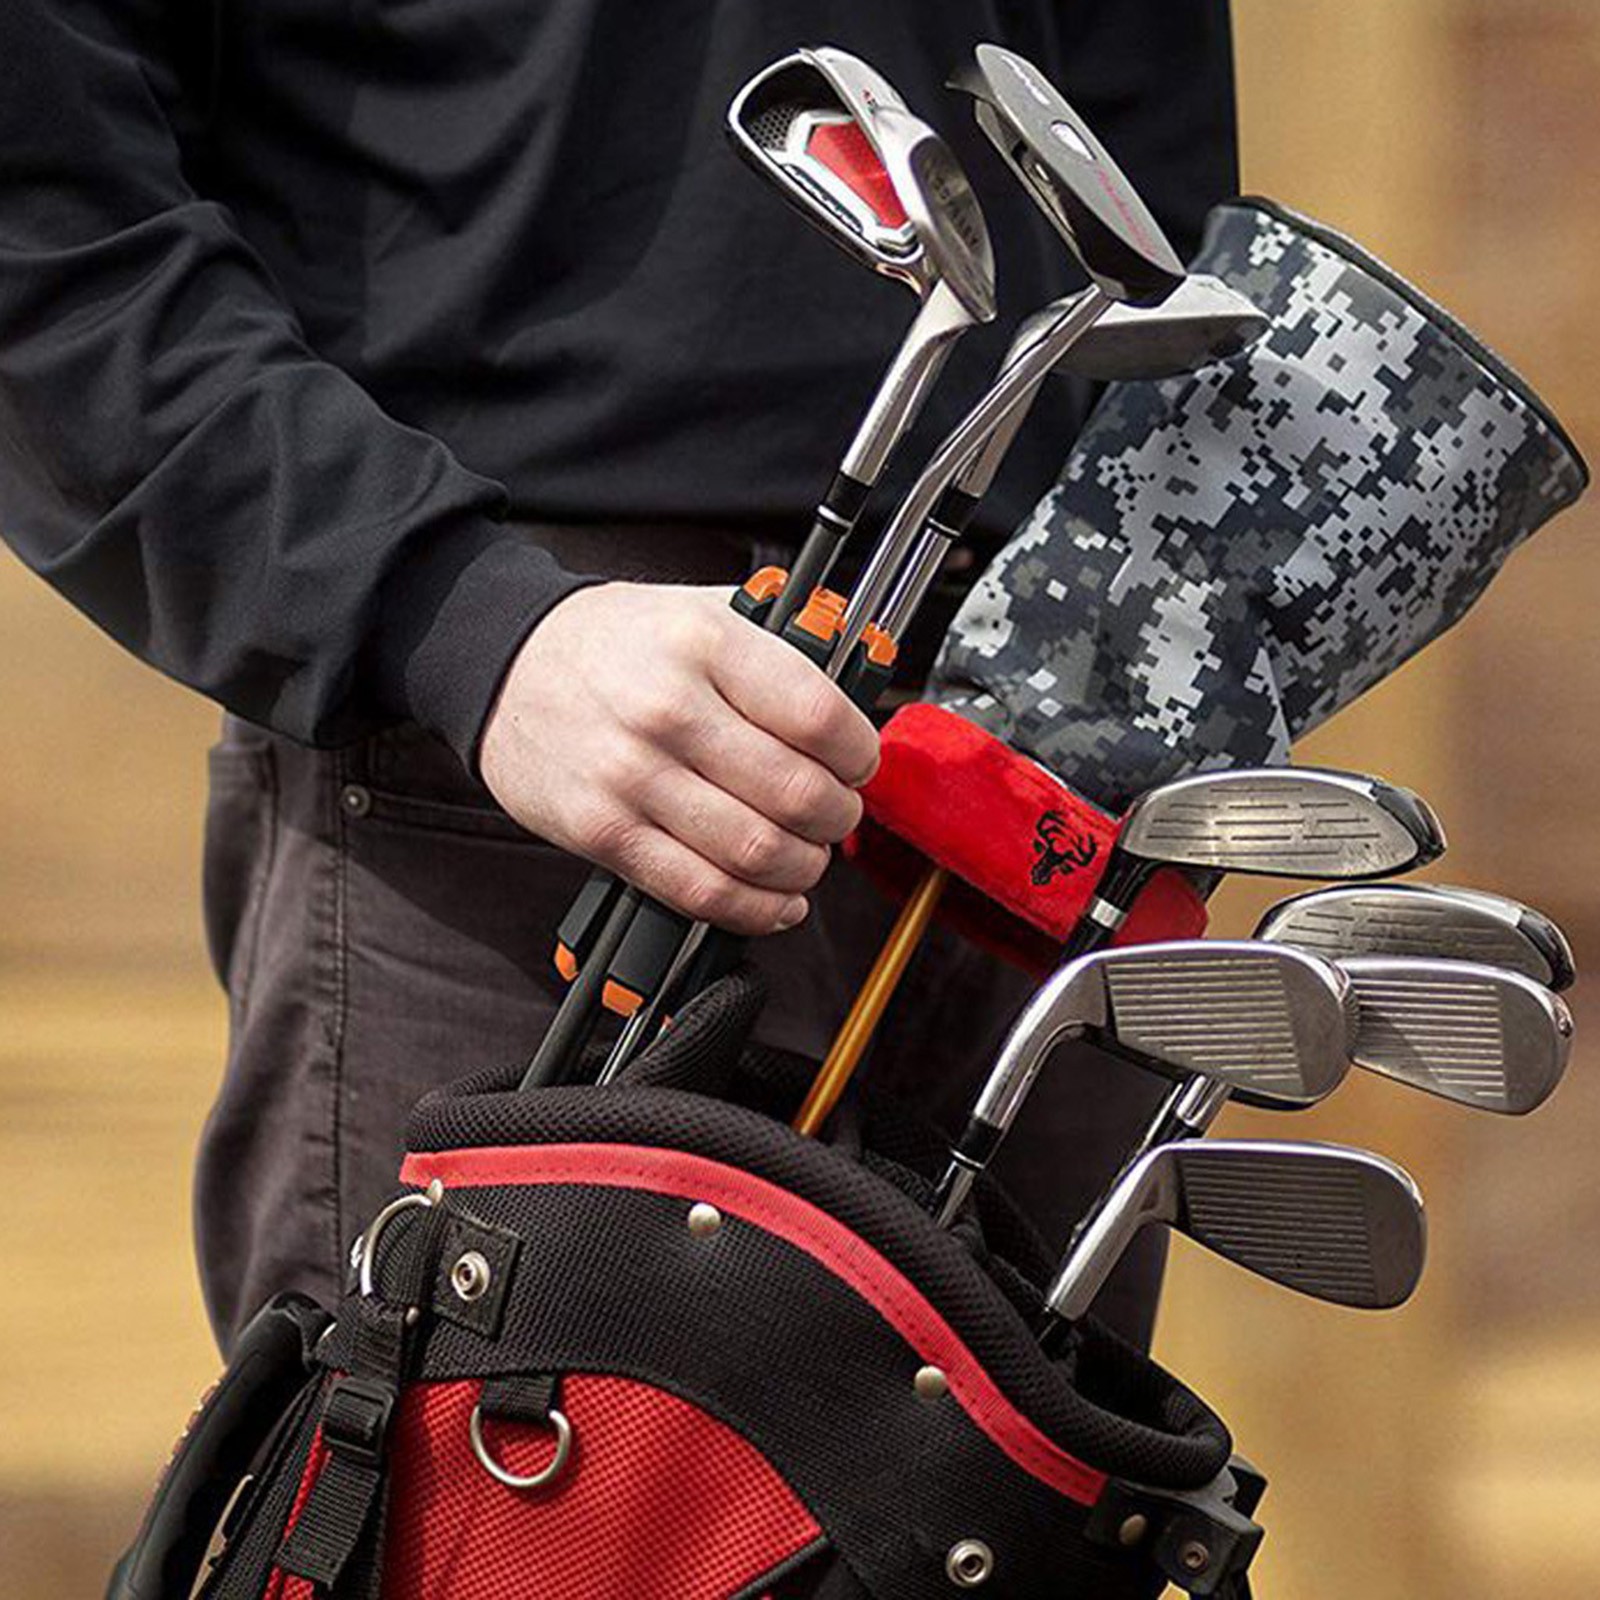 New Silo Golf Club Carrier Portable Golf Club Holder Organiser Perfect For The Range Or Practice Holds 6 Clubs